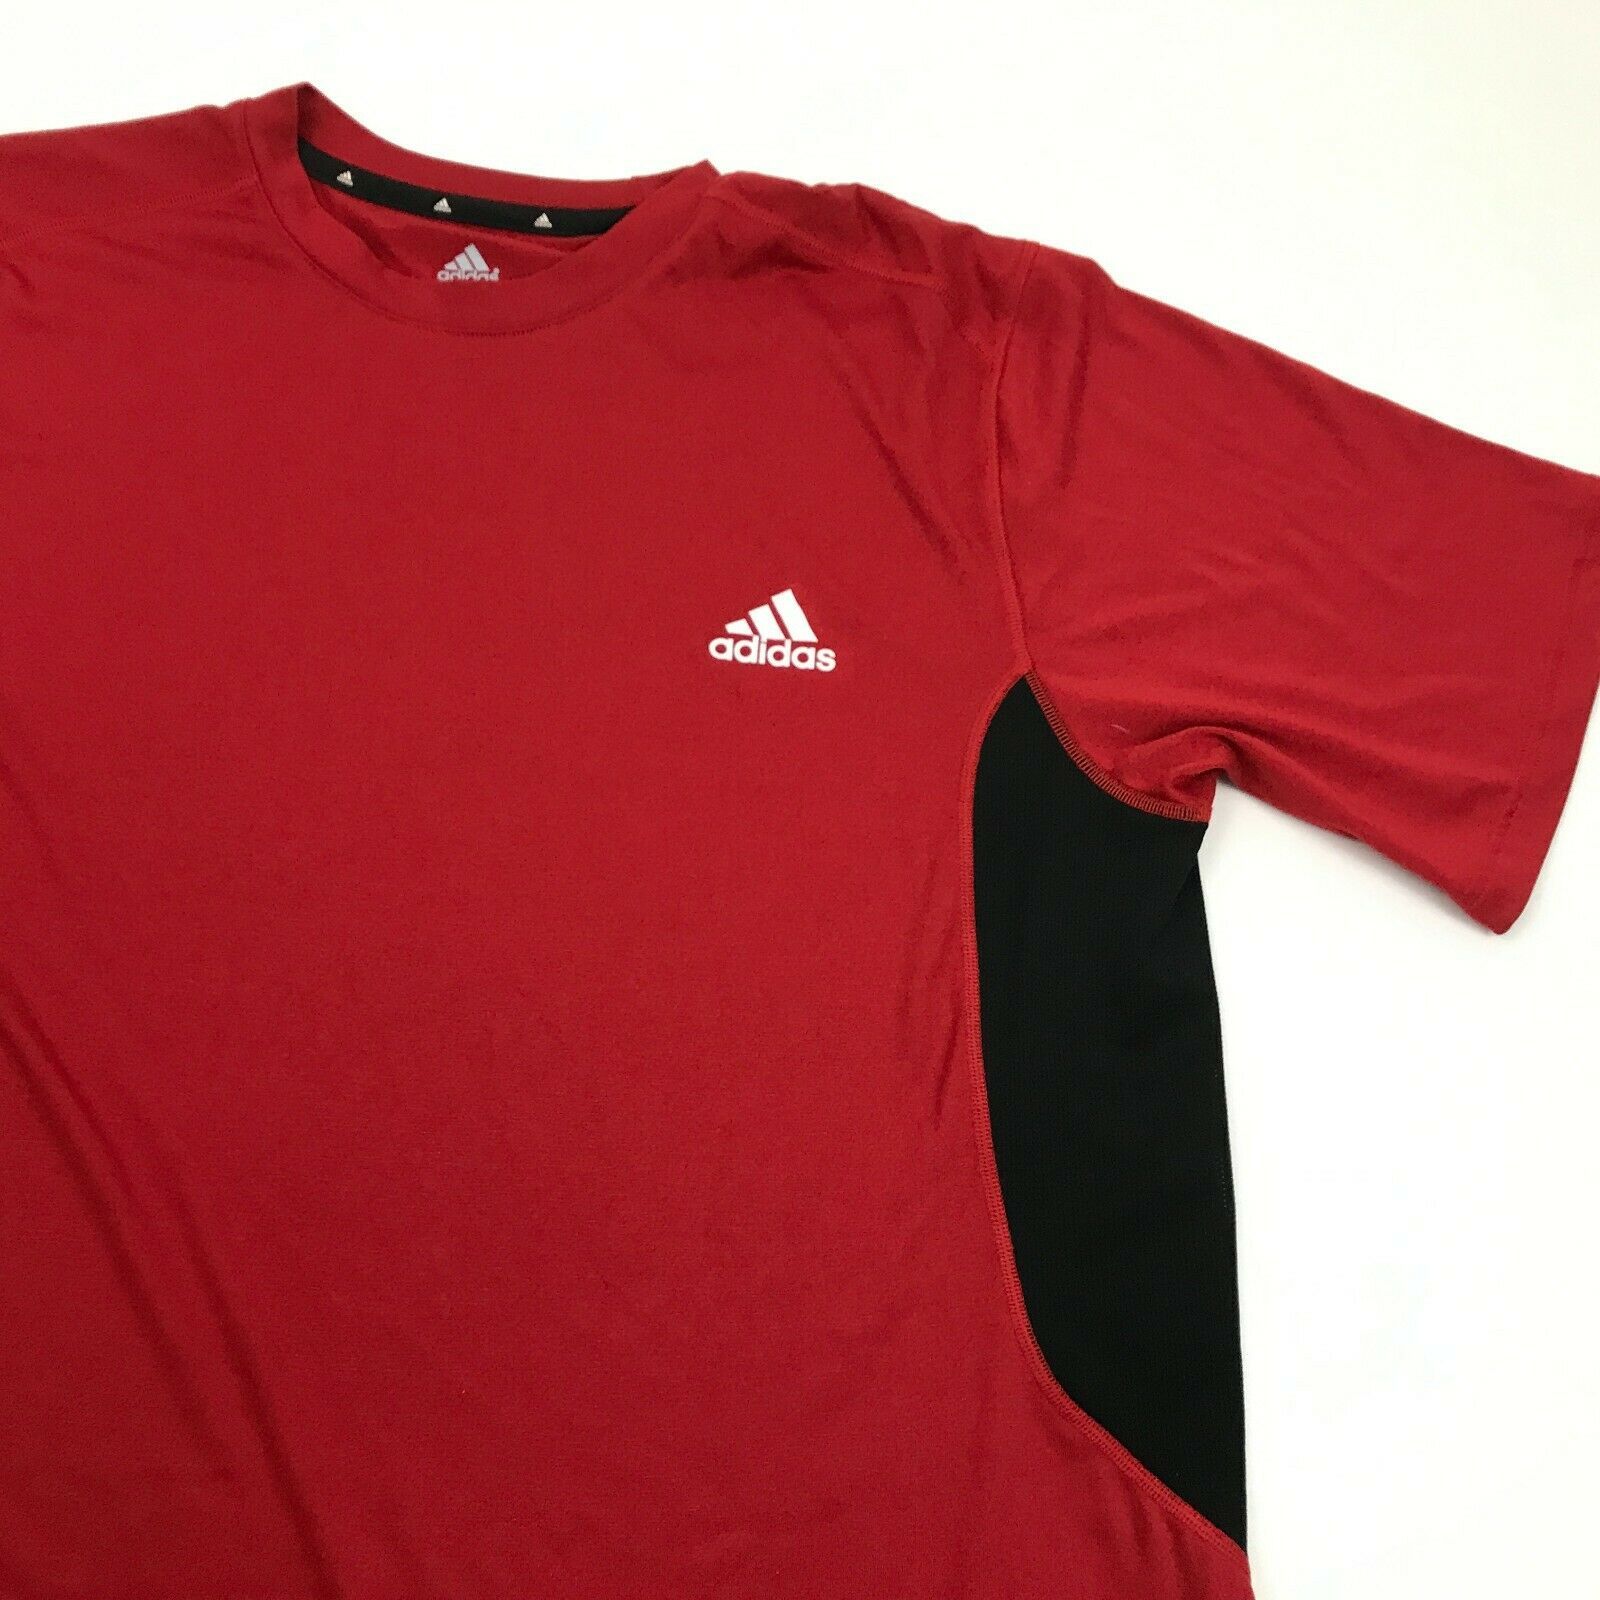 NEW Adidas Climalite Dry Fit Shirt Mens Size Extra Large XL Red Short ...